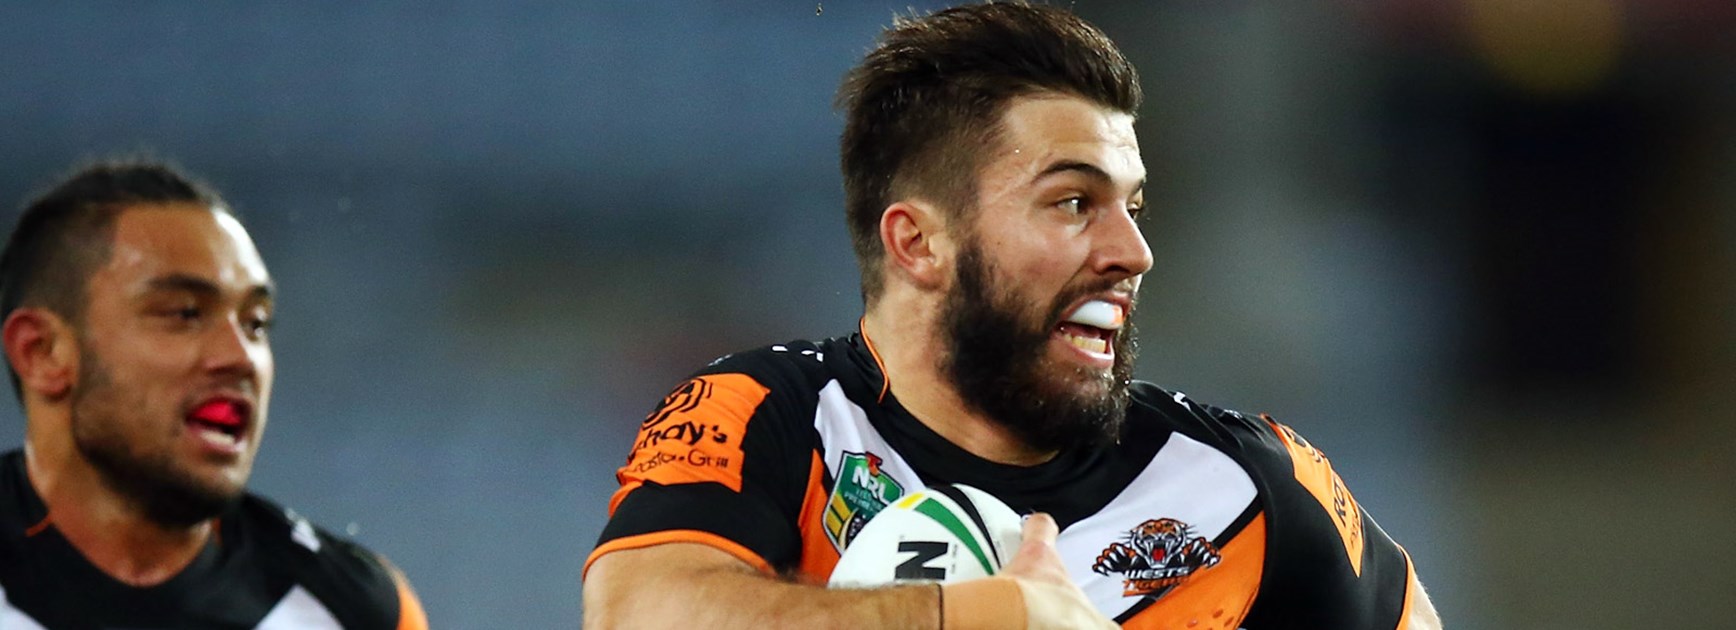 Wests Tigers fullback James Tedesco became the second player in 2015 to score over 100 NRL Fantasy points in a single game in Round 14.